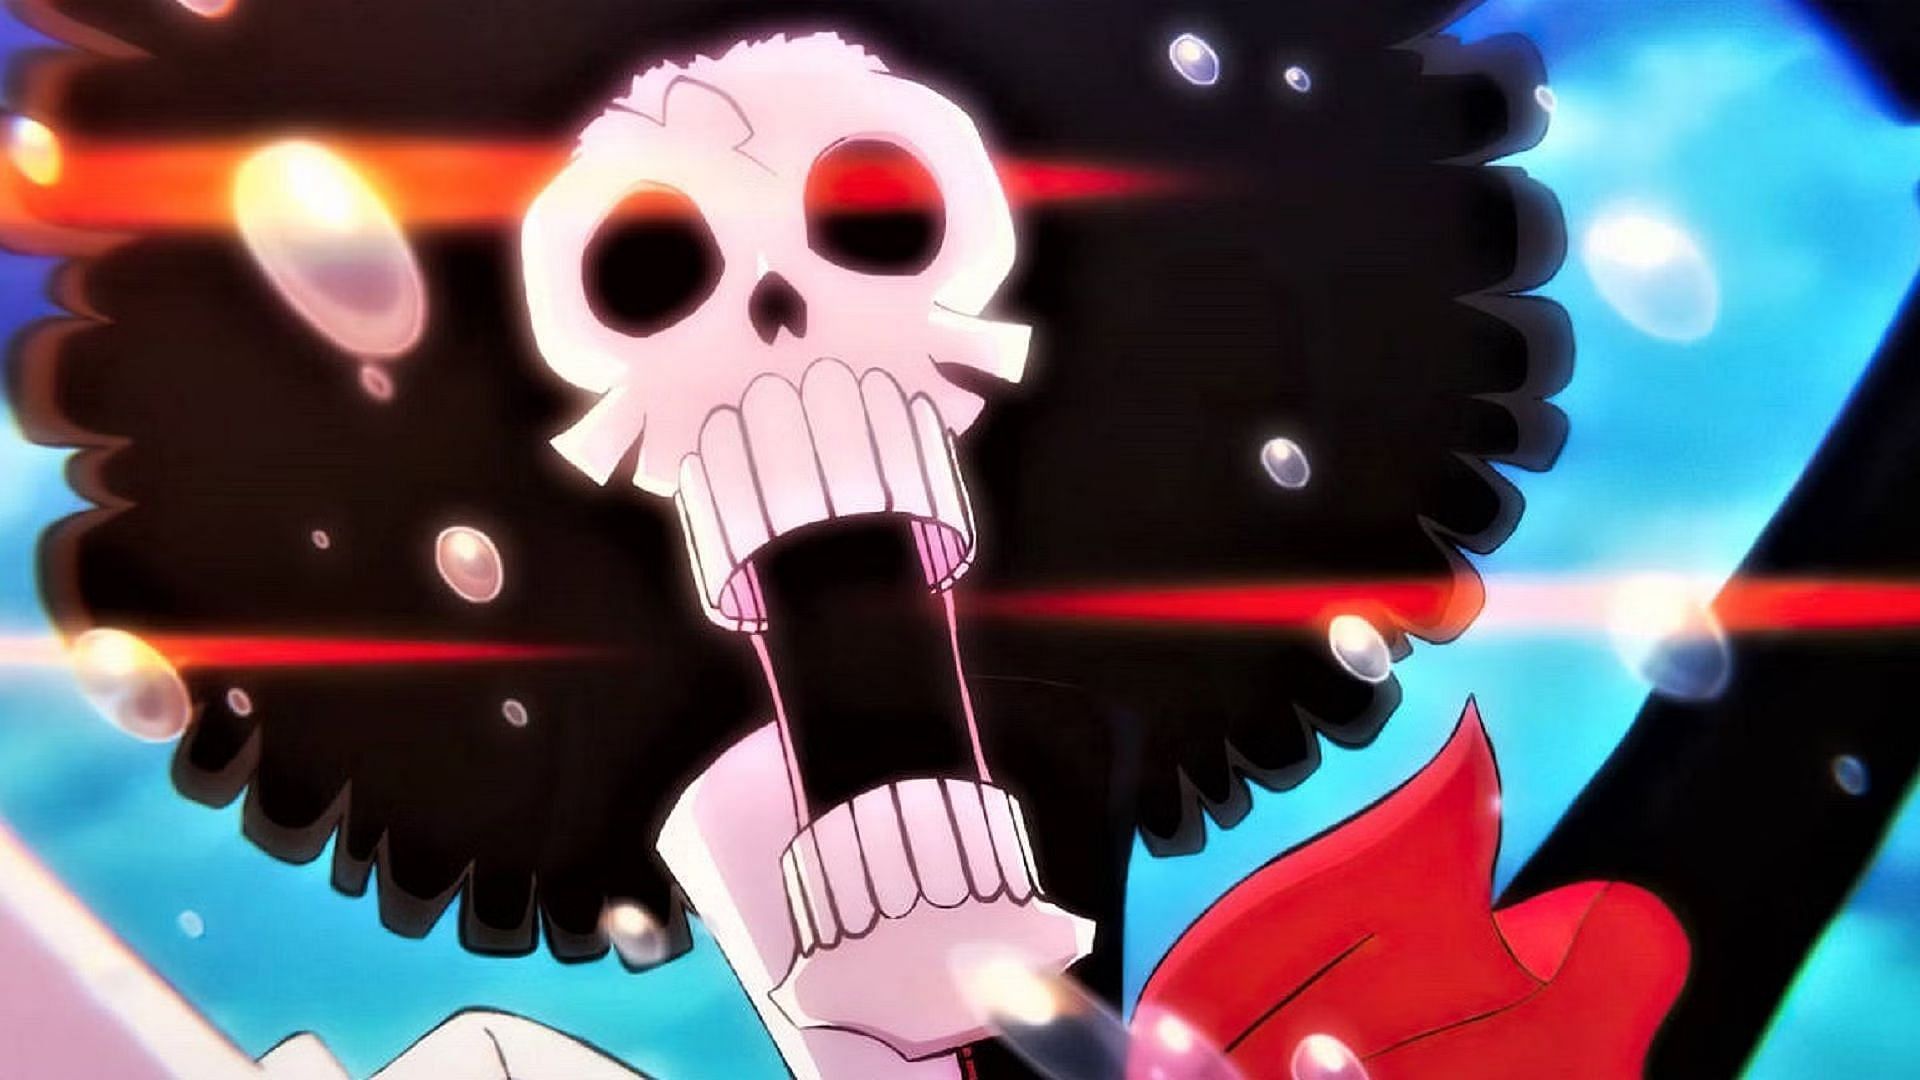 Brook as shown in One Piece anime (Image via Toei Animation)